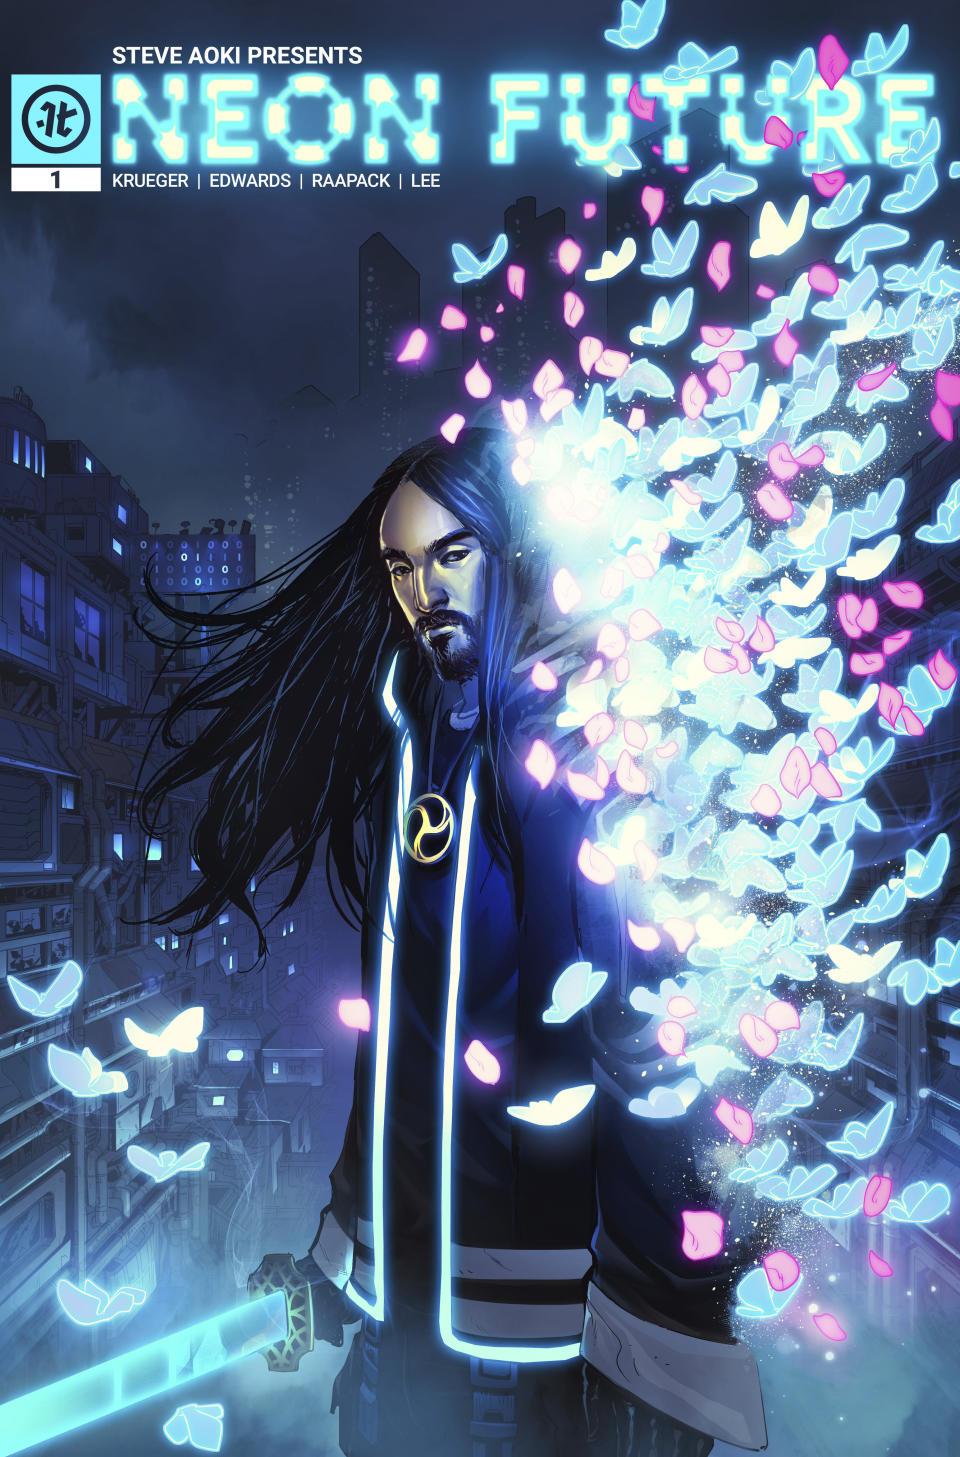 This image provided by Steve Aoki shows a scene from his comic book "Neon Future." The graphic novel is set roughly 30 years from now in a United States that has outlawed advanced technology. A civil war is brewing between people who have integrated technology into their bodies and those who have not. The resistance movement, Neon Future, is led by a longhaired, bearded, Asian-American man named Kita Sovee, an anagram of Steve Aoki. (Steve Aoki via AP)